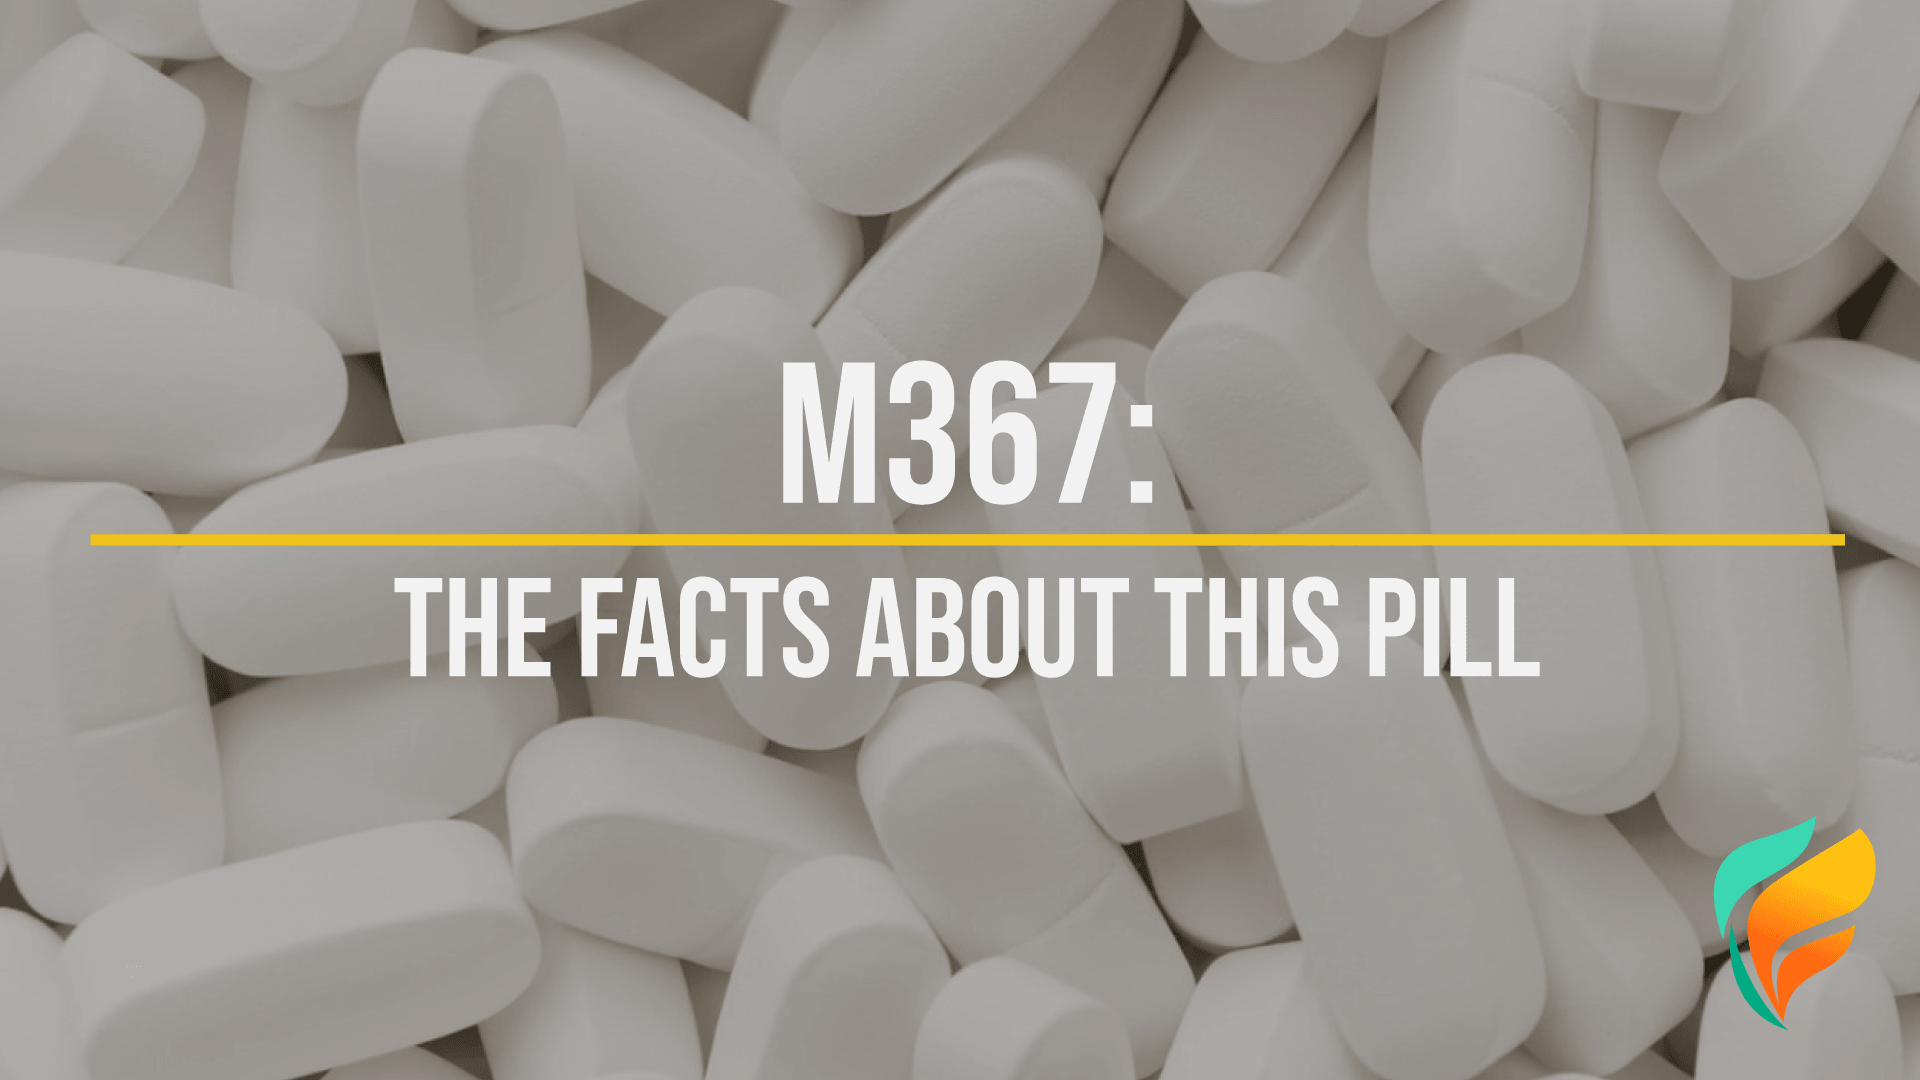 M366 White Pill and M367 White Oval Pill: Dangers of Addiction